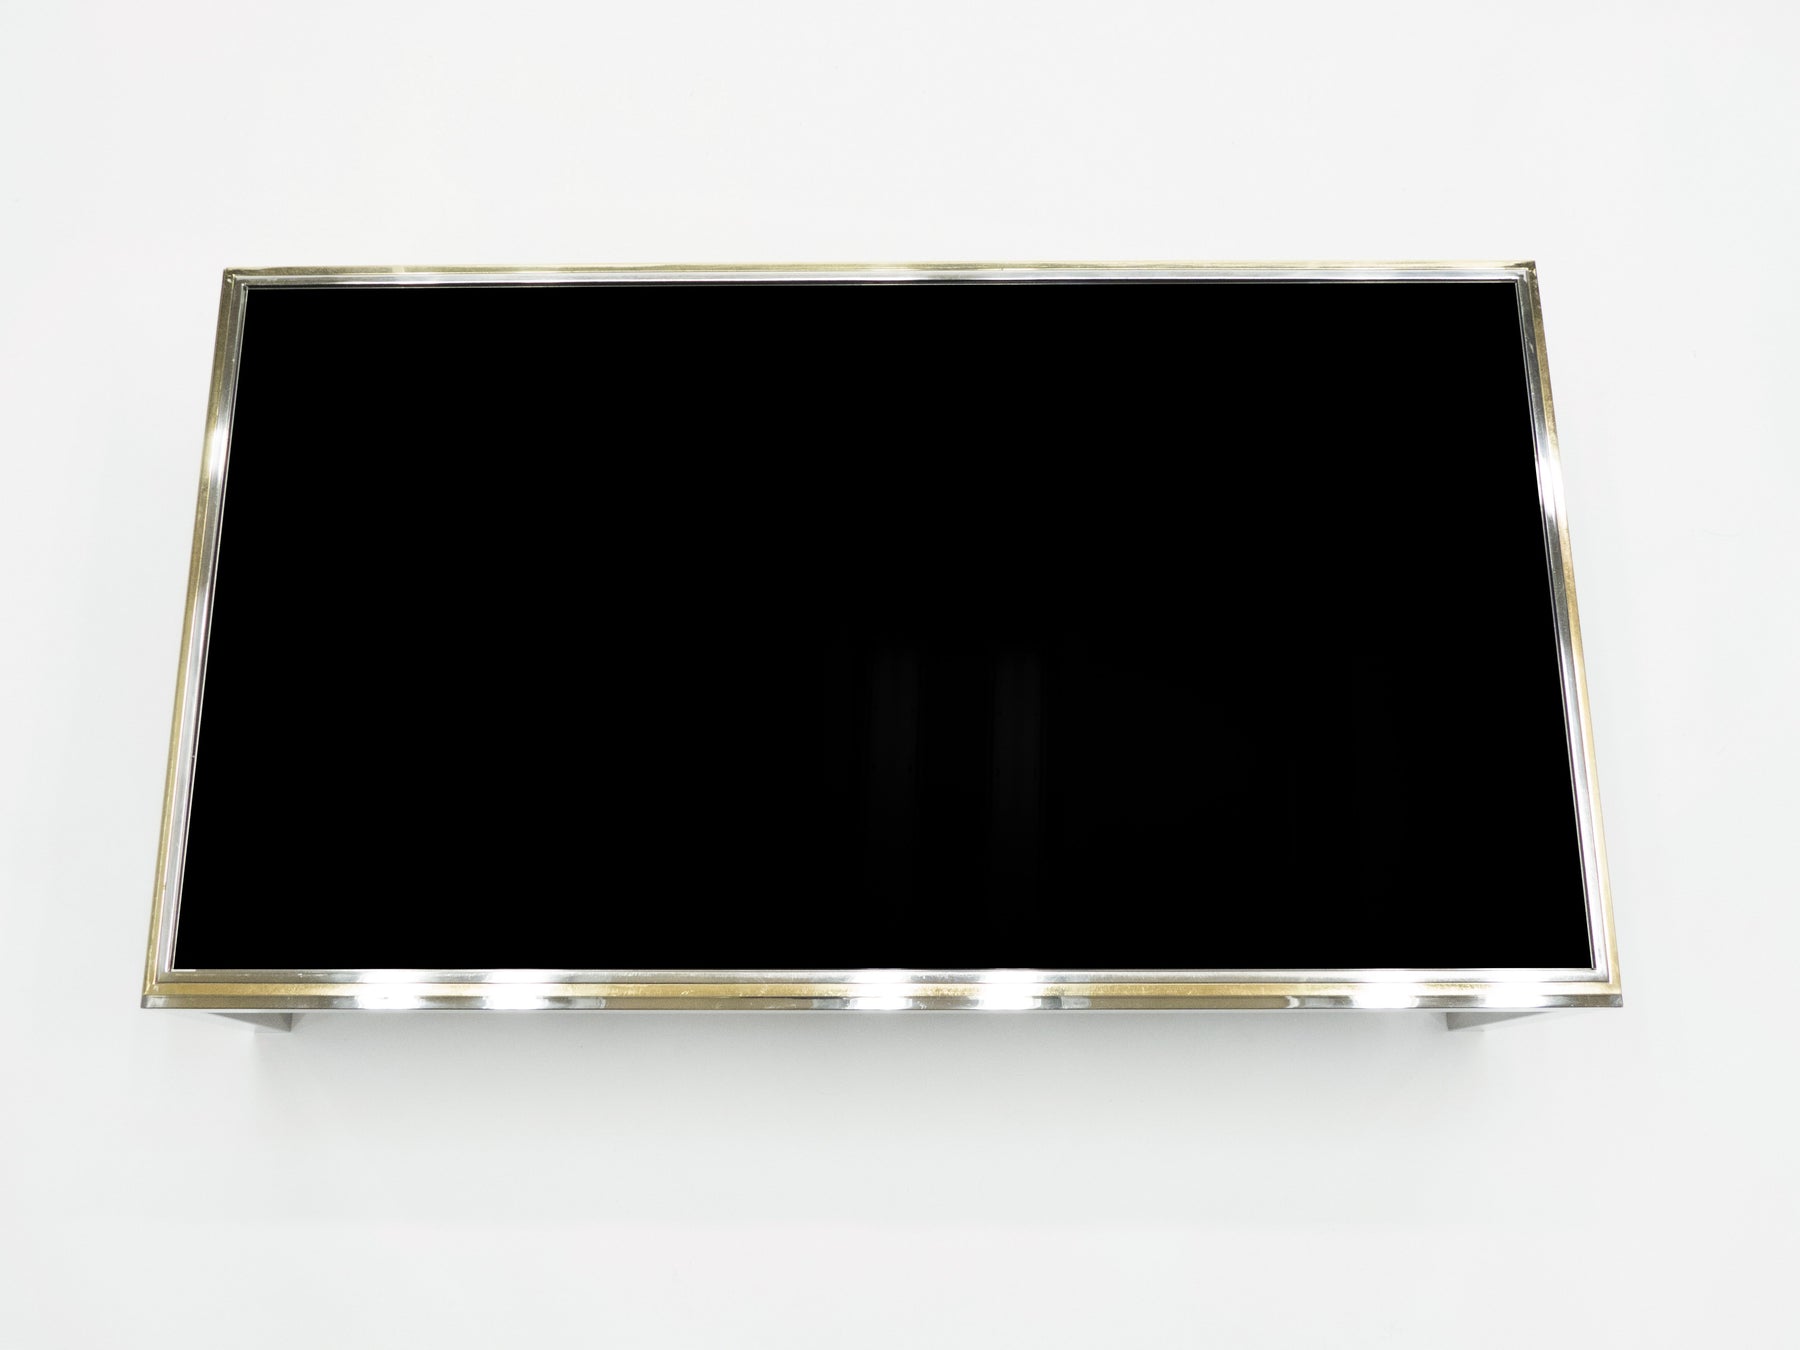 Large brass and chrome Coffee Table Willy Rizzo model Flaminia 1970s